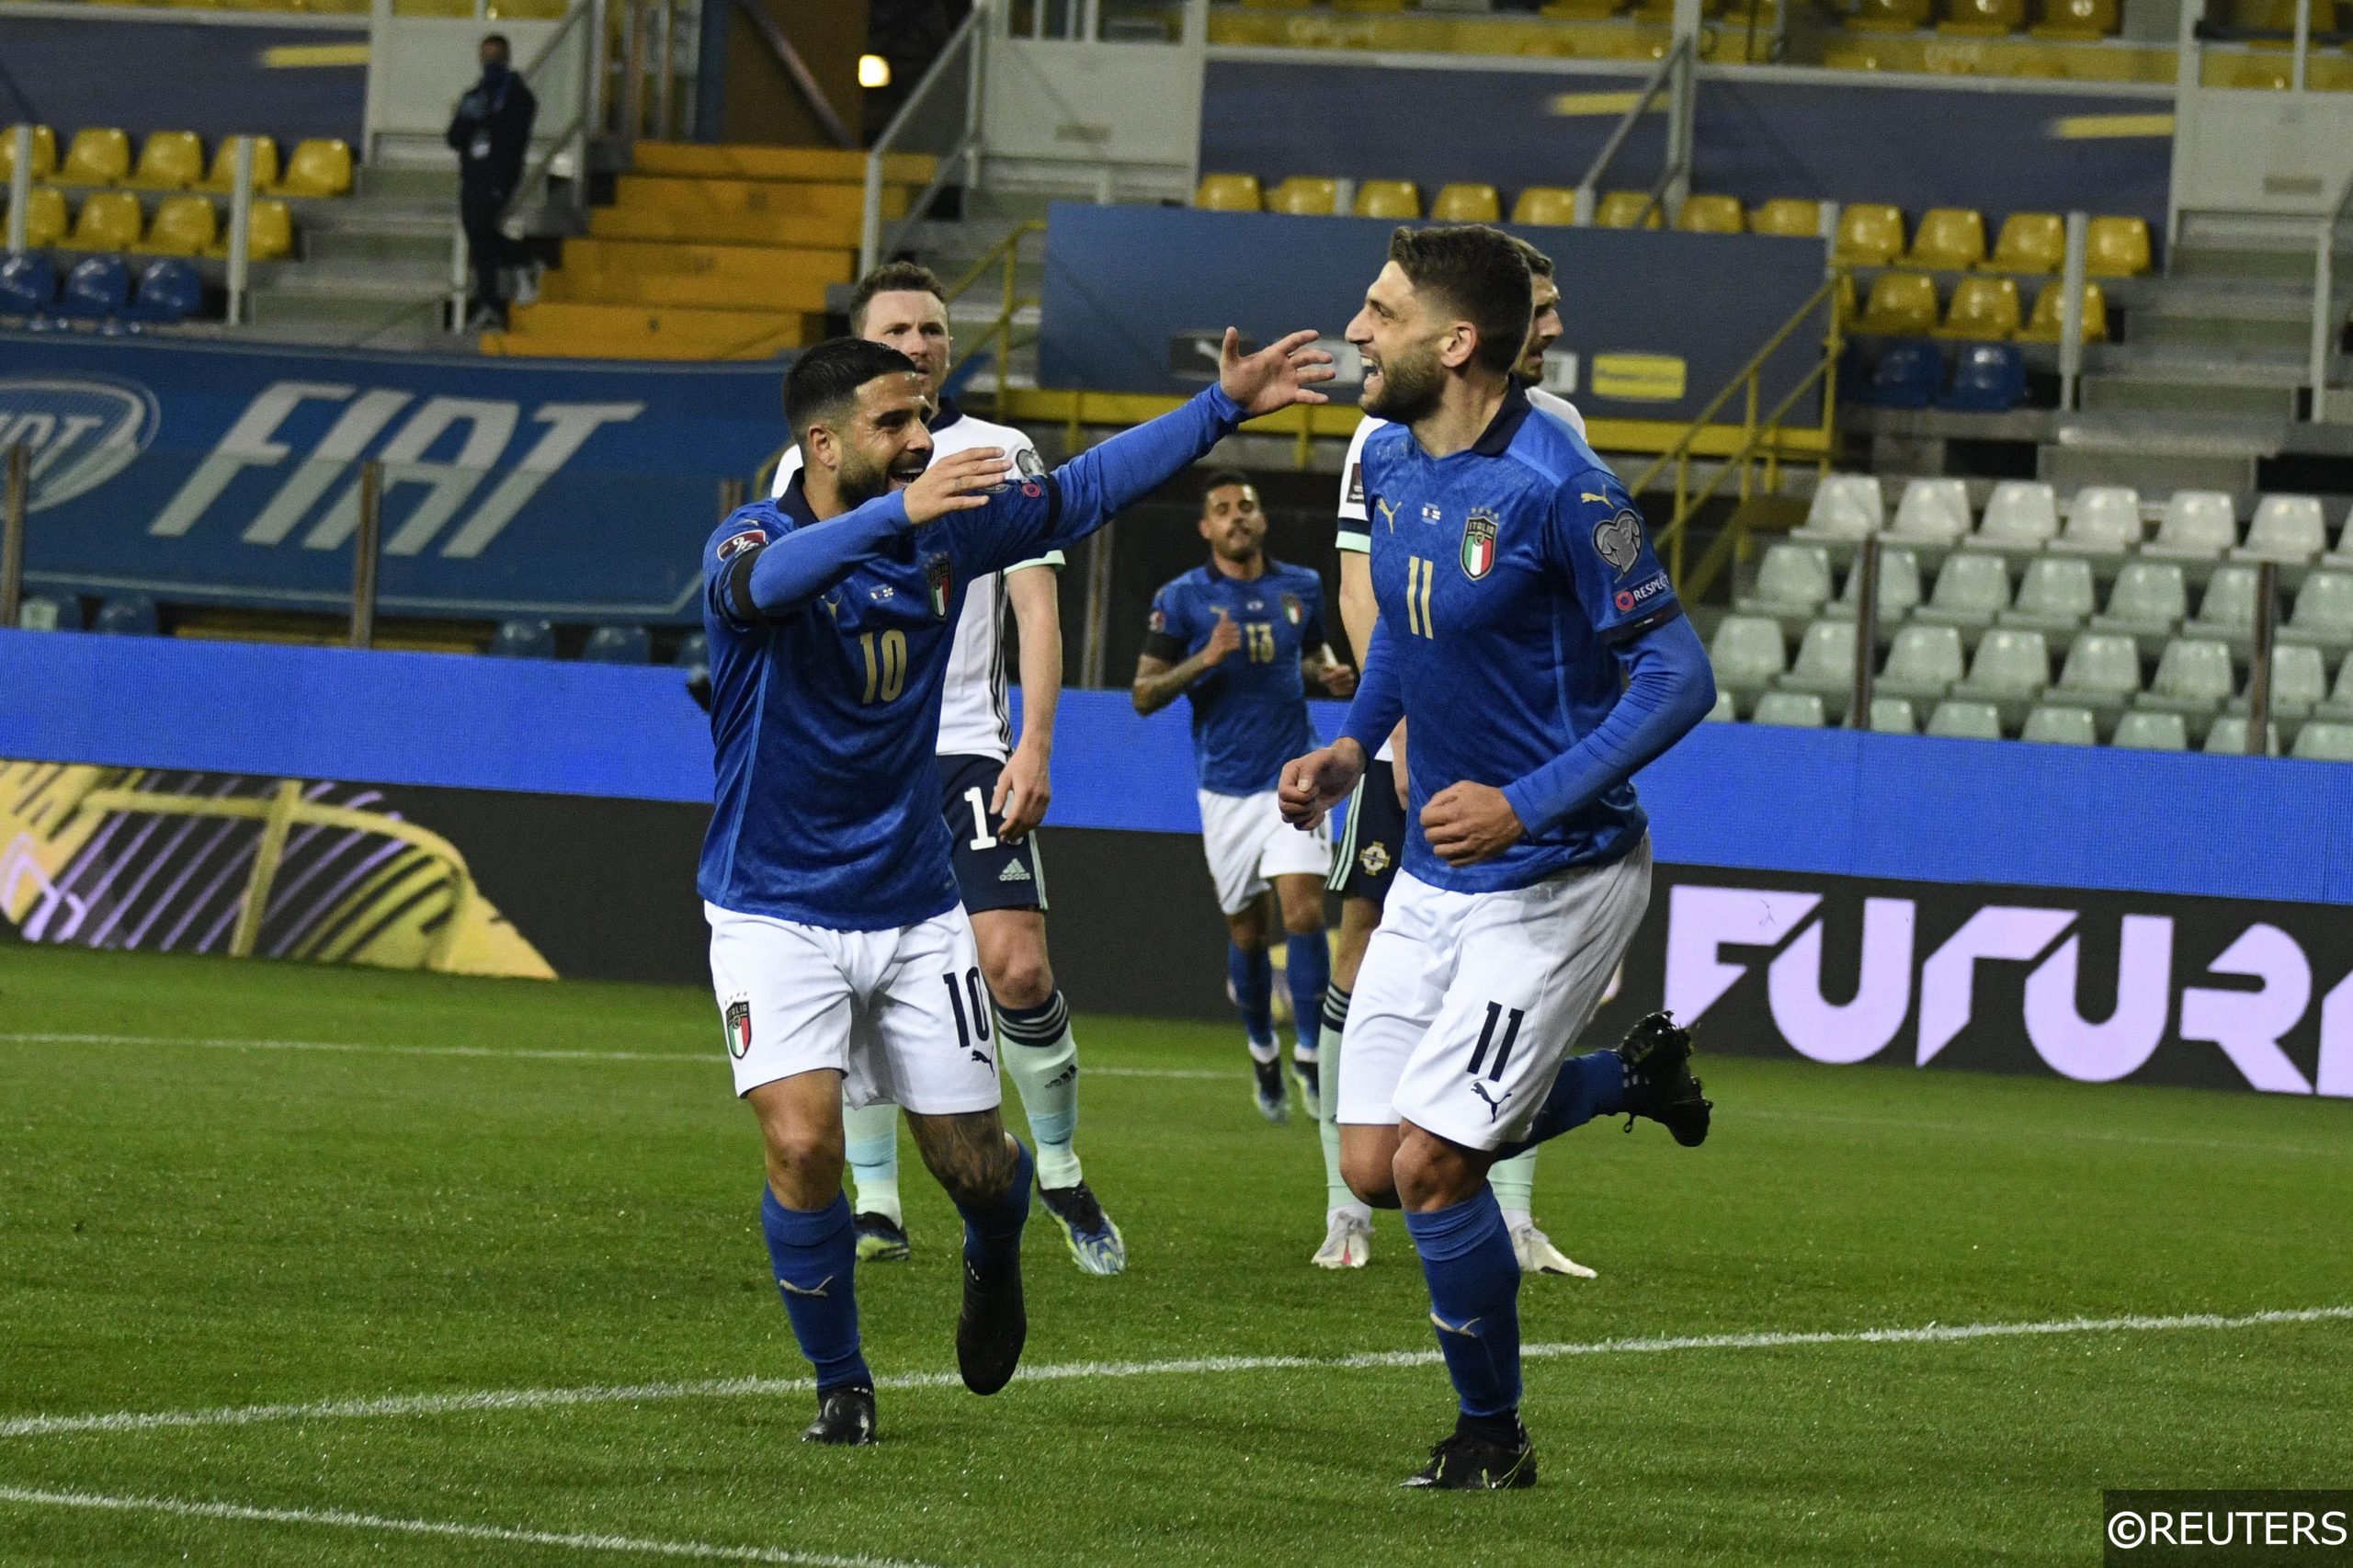 COMPLIANT Insigne and Berardi celebrate a goal for Italy